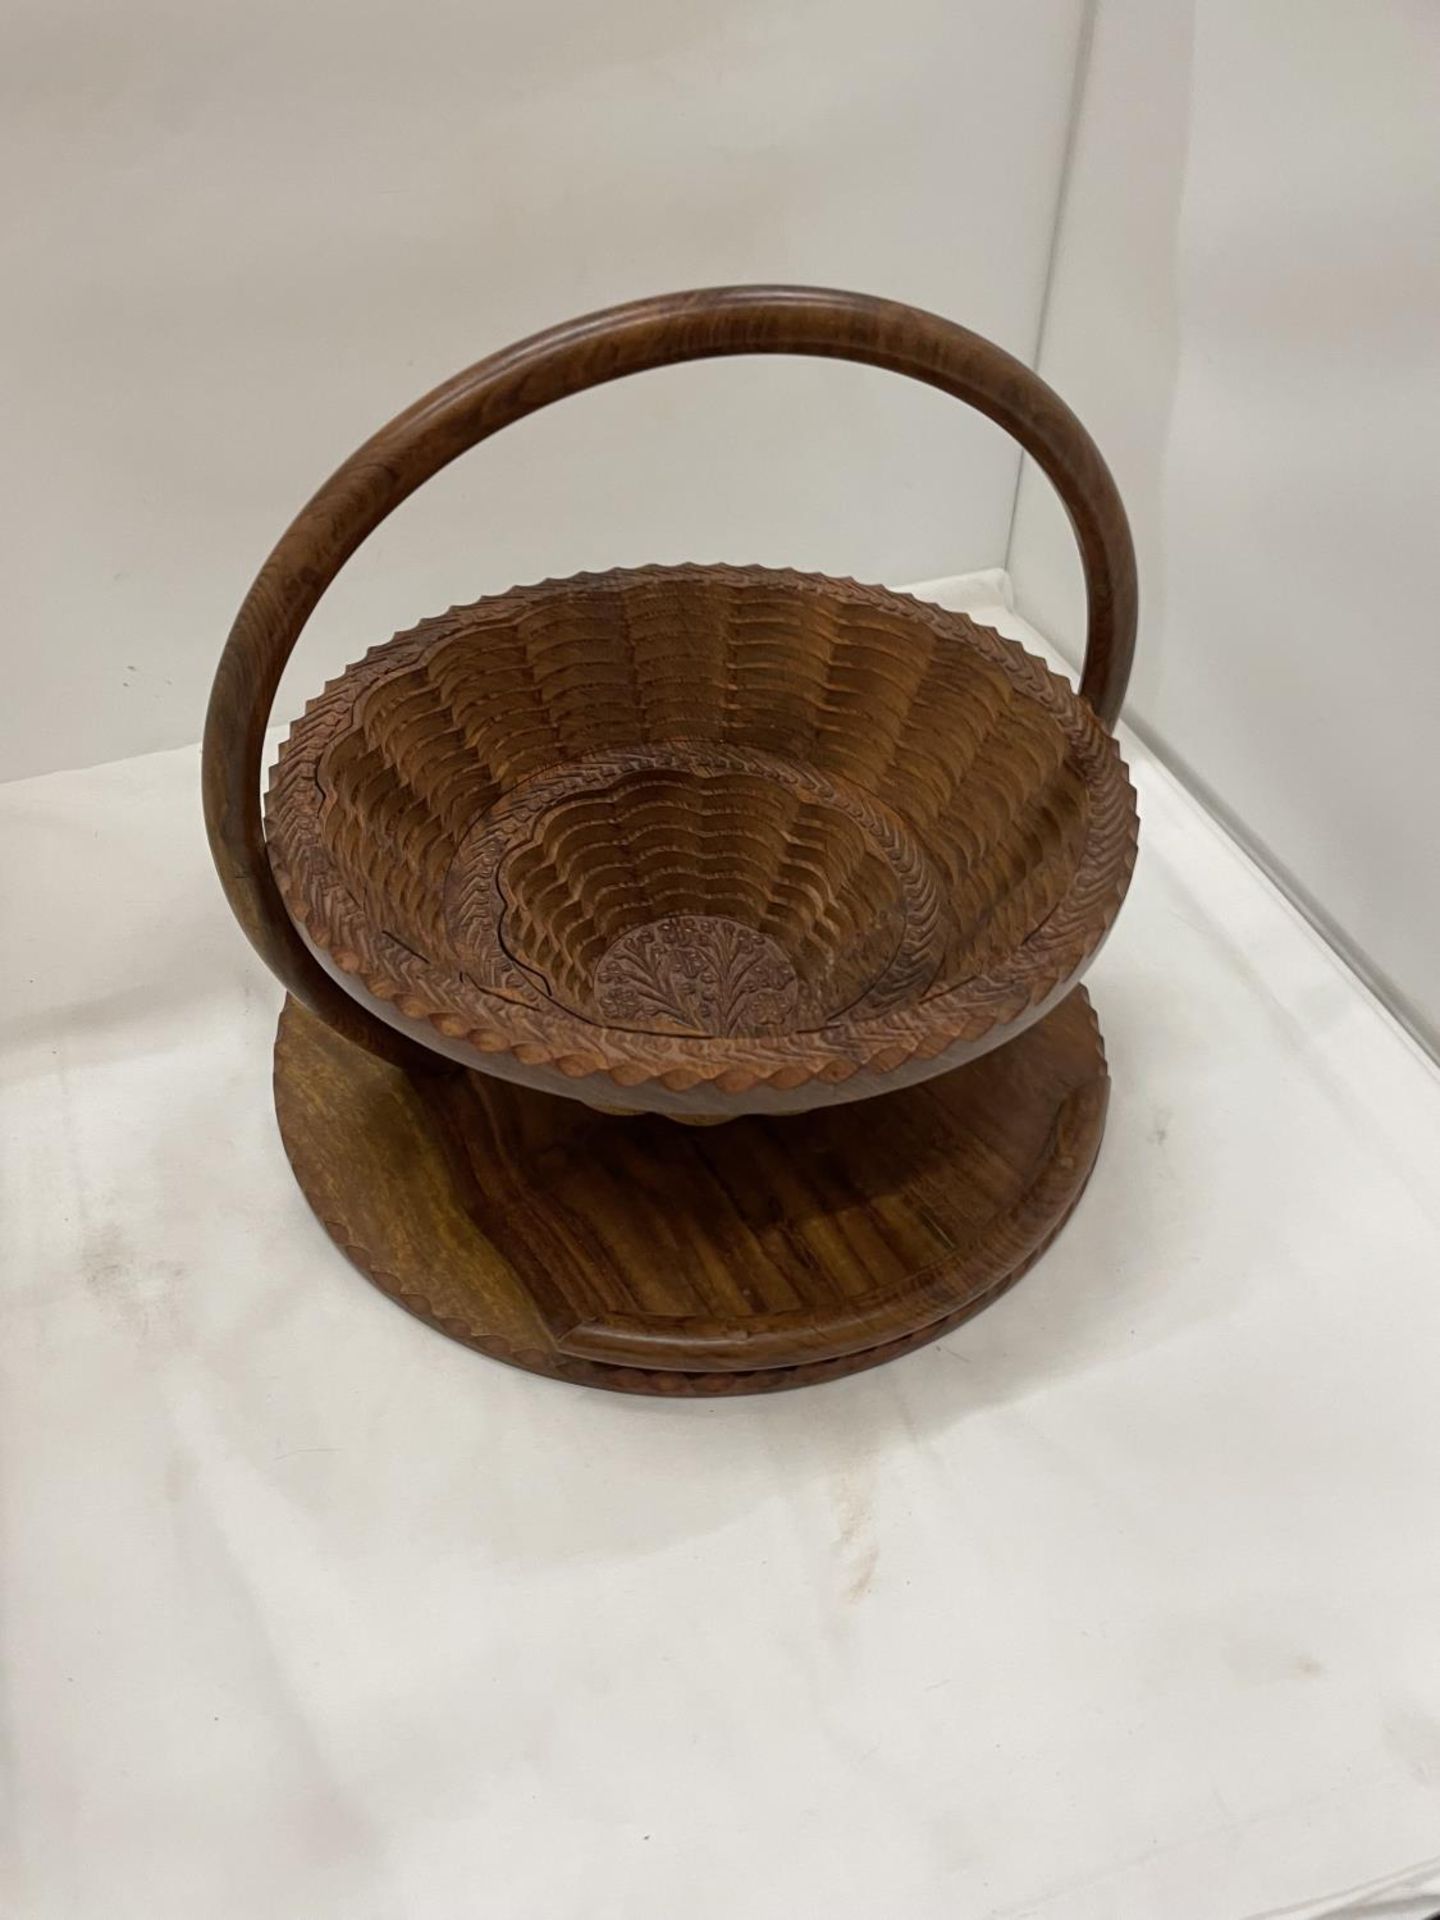 A METAMORPHIC WOODEN TRAY, PULL THE HANDLE UP AND IT BECOMES A BASKET